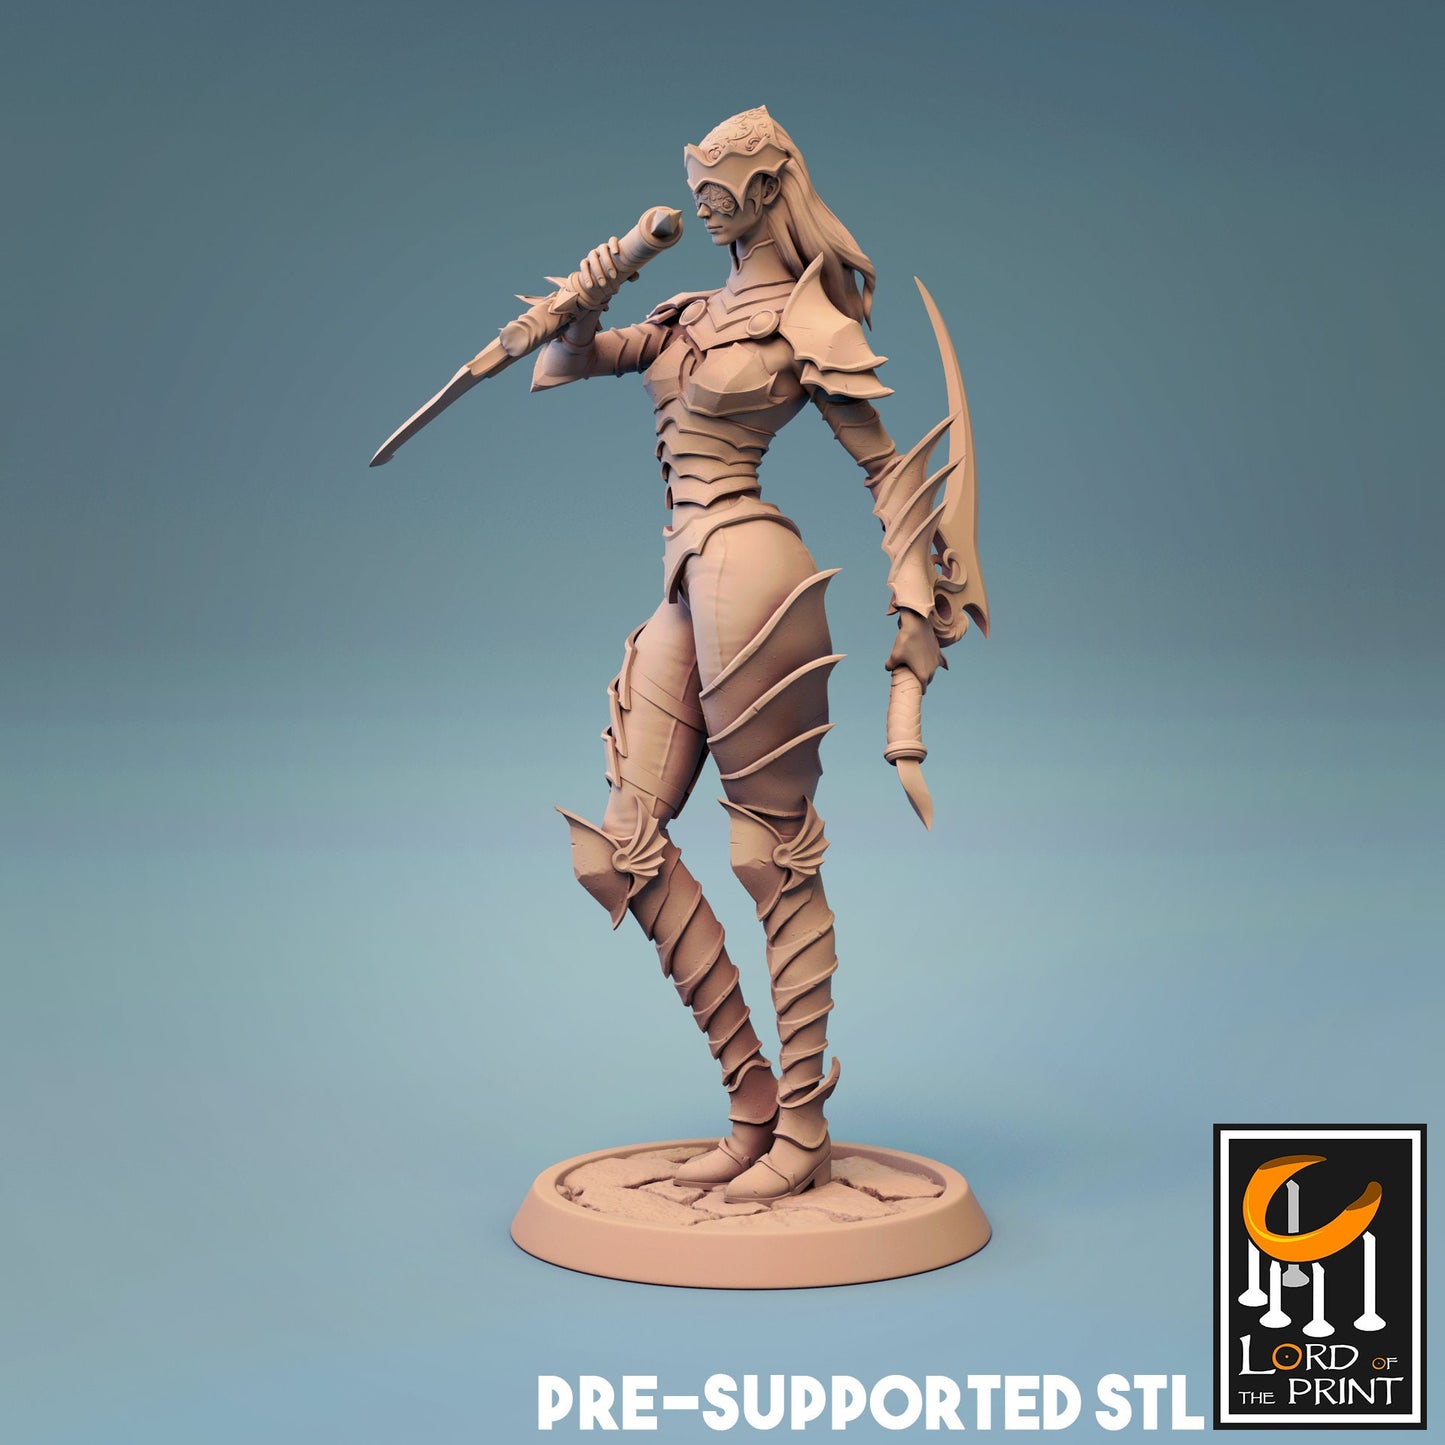 Army of Death - Female Human Fighter D&D miniatures, by Lord of the Print // 3D Print on Demand / DnD / Pathfinder / RPG